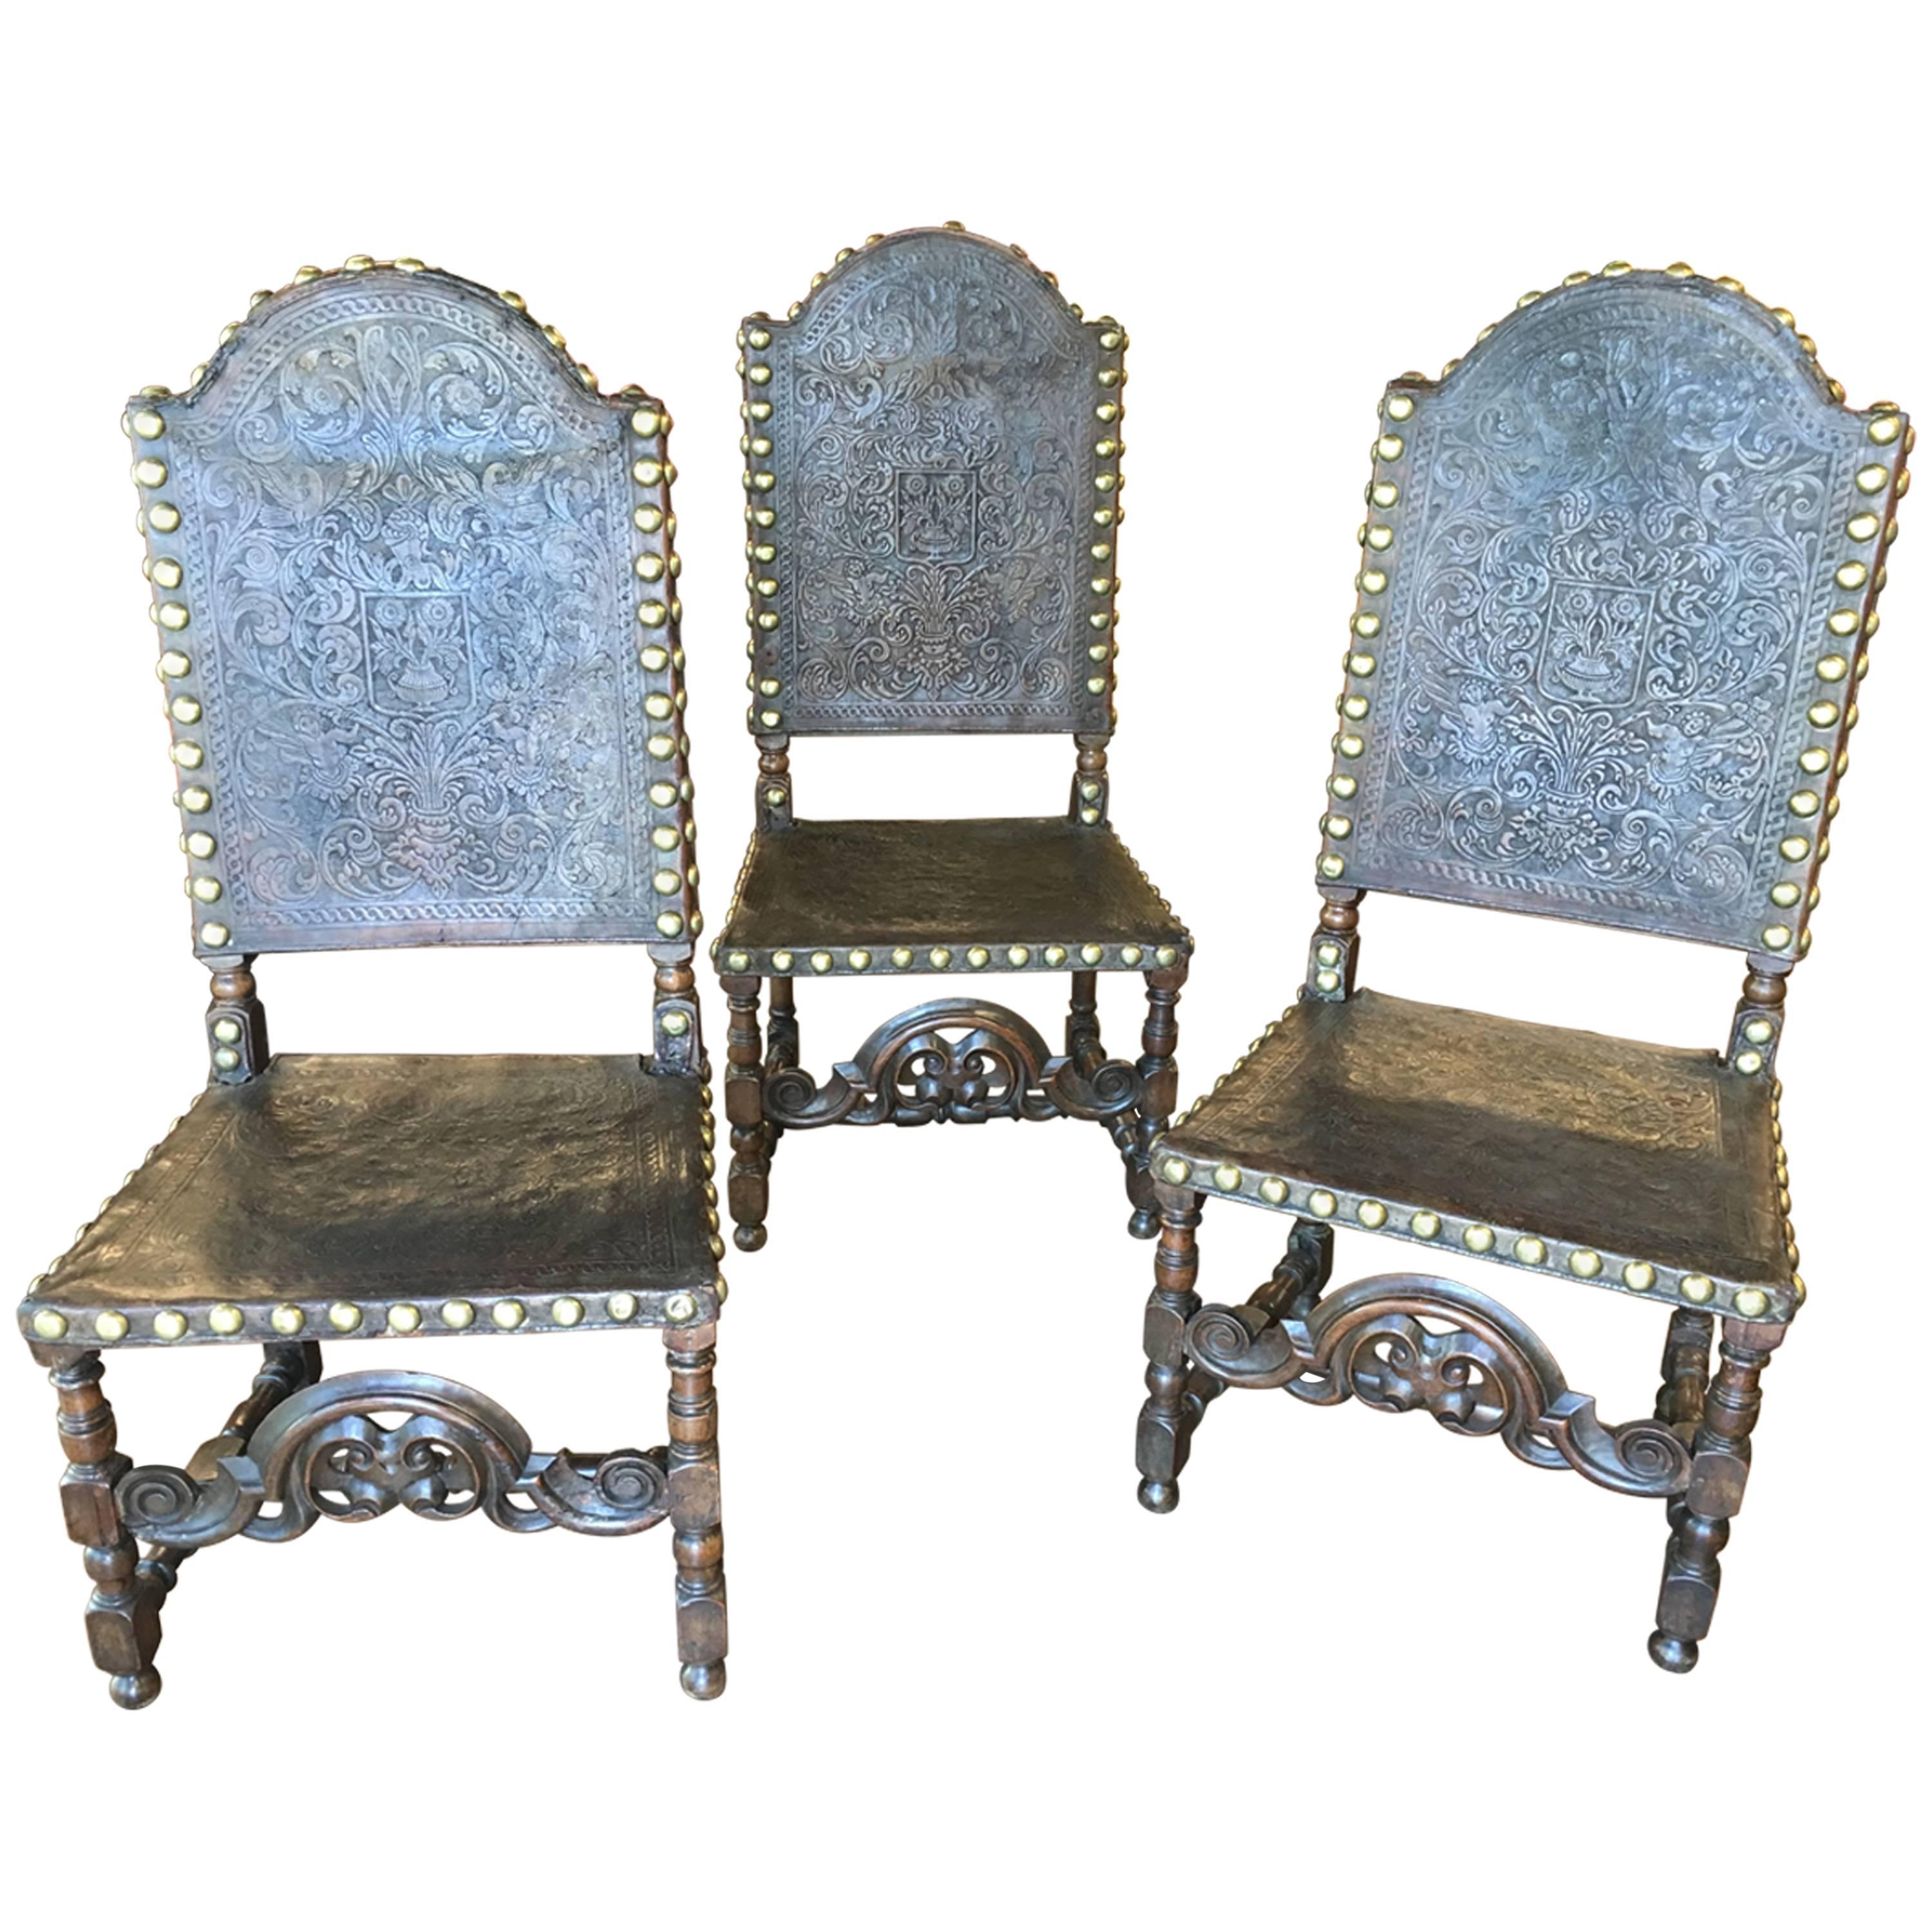 19th Century Portuguese Hand-Embossed Leather Chairs, Spanish Baroque Style For Sale